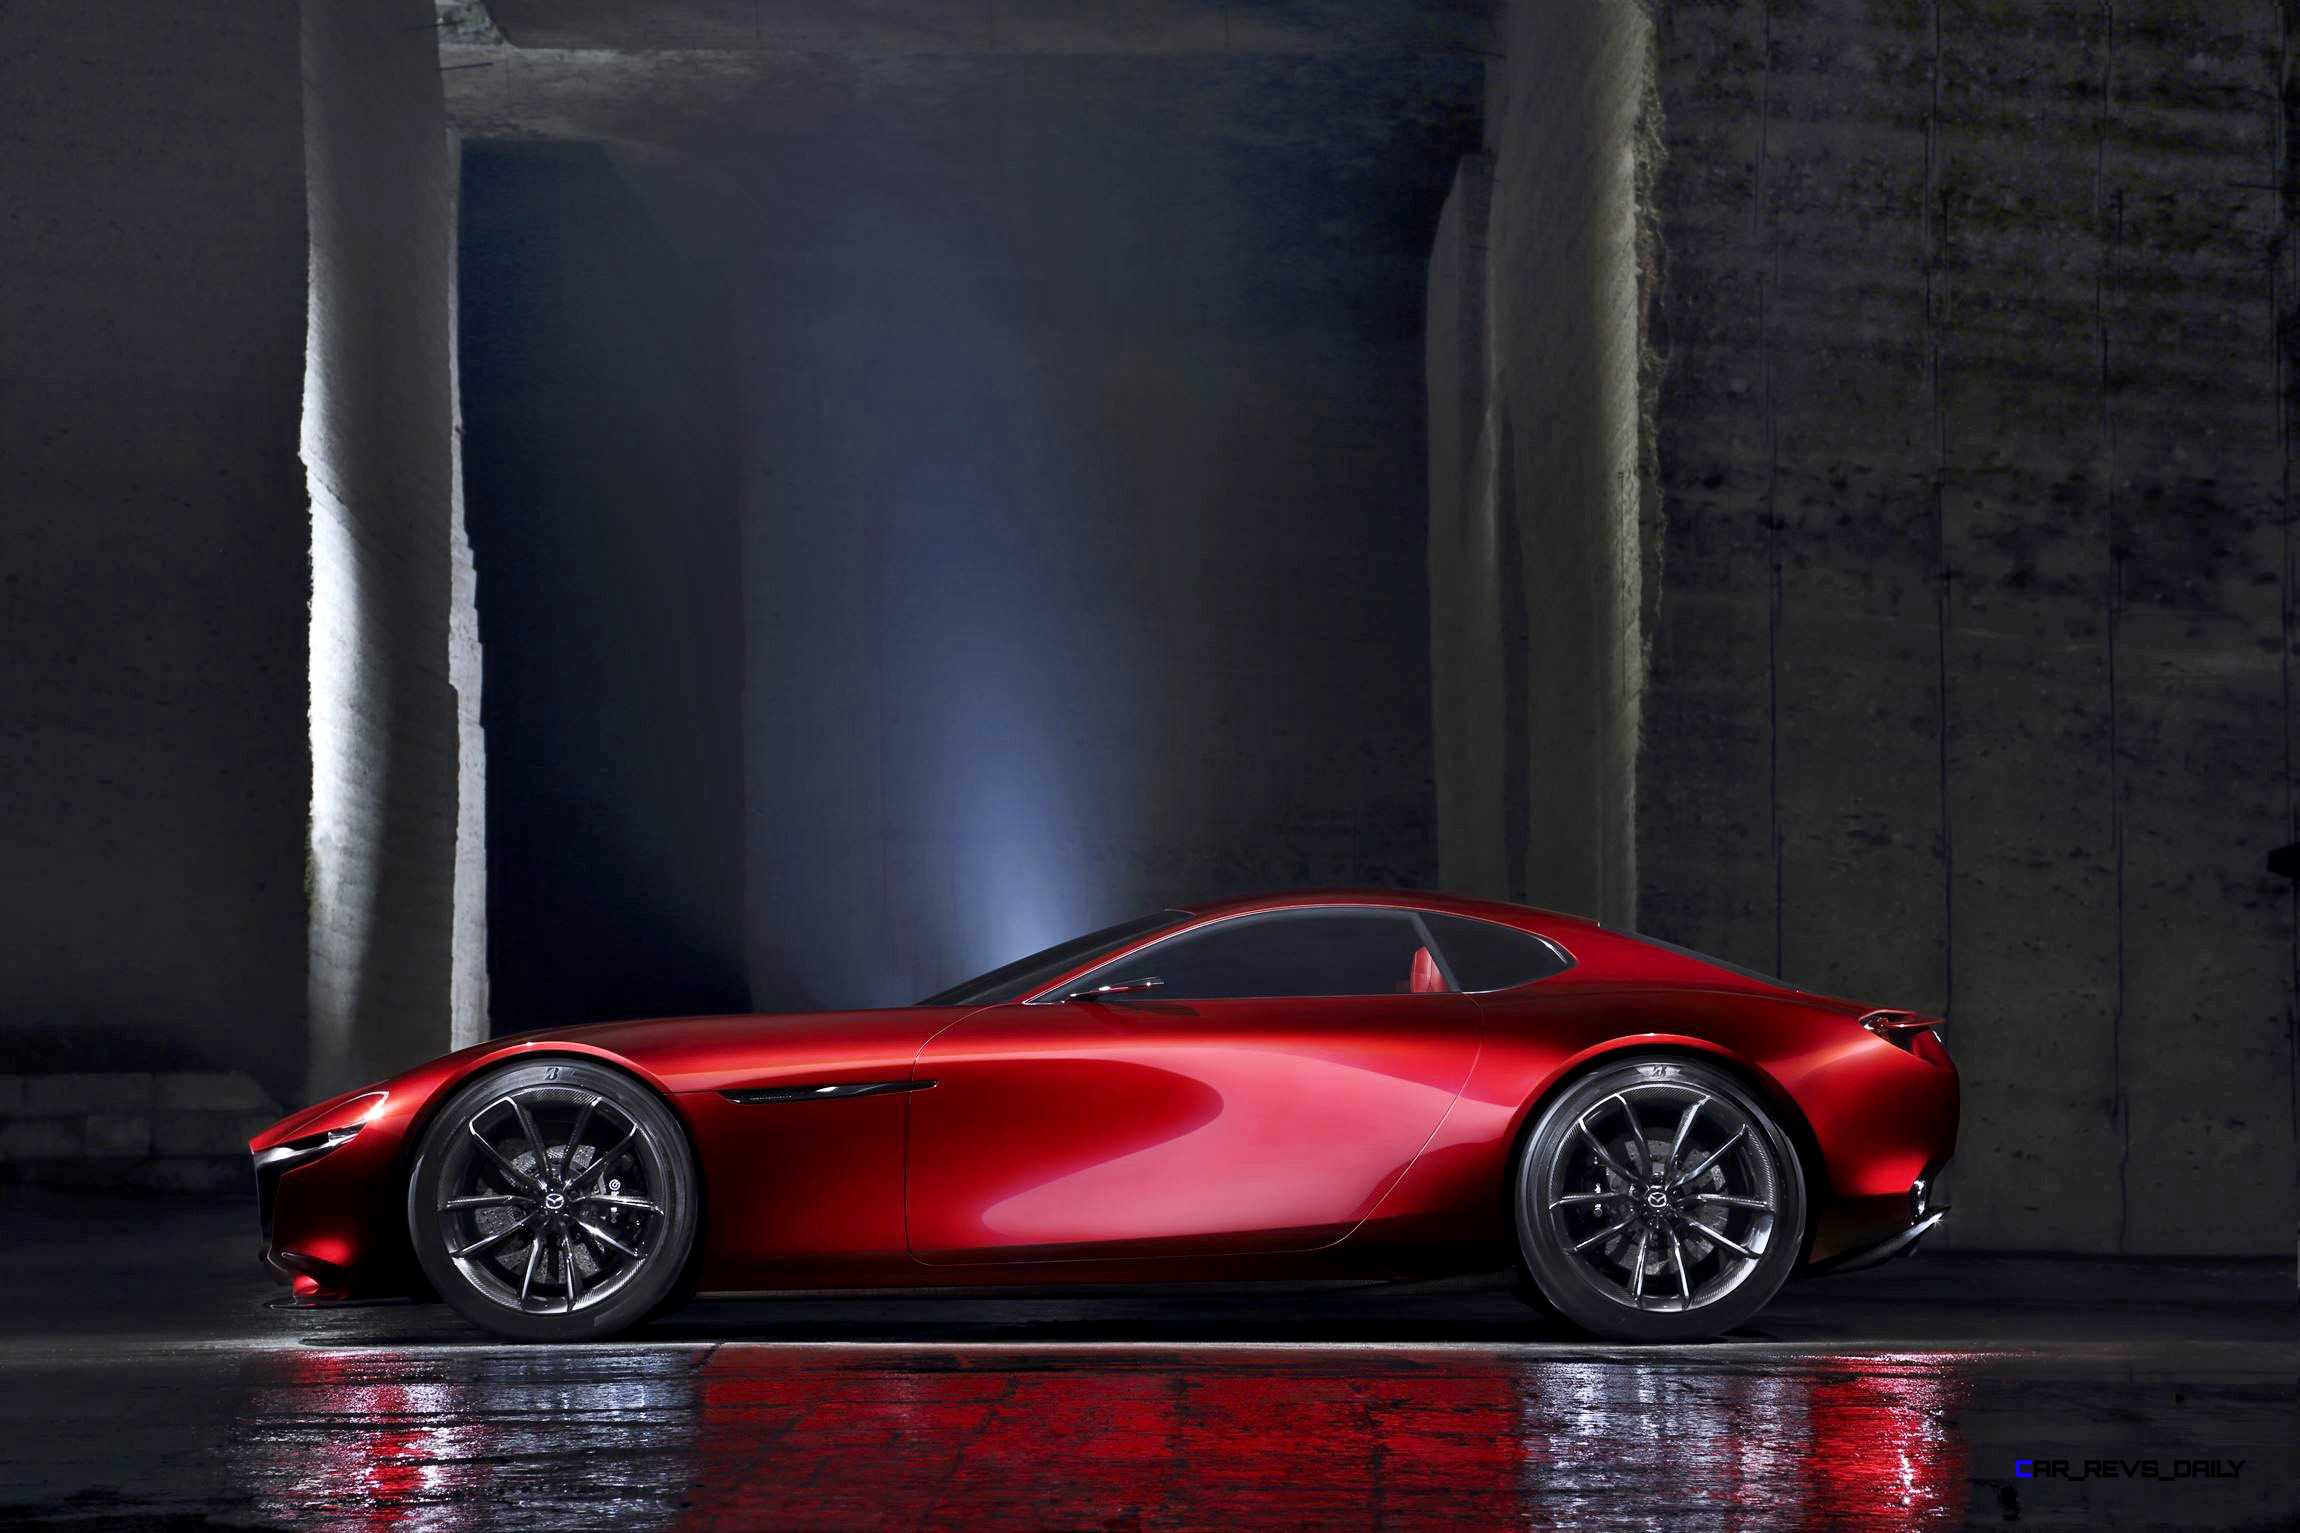 2015 Mazda RX-VISION Concept Is All-New SkyActiv-R Super GT